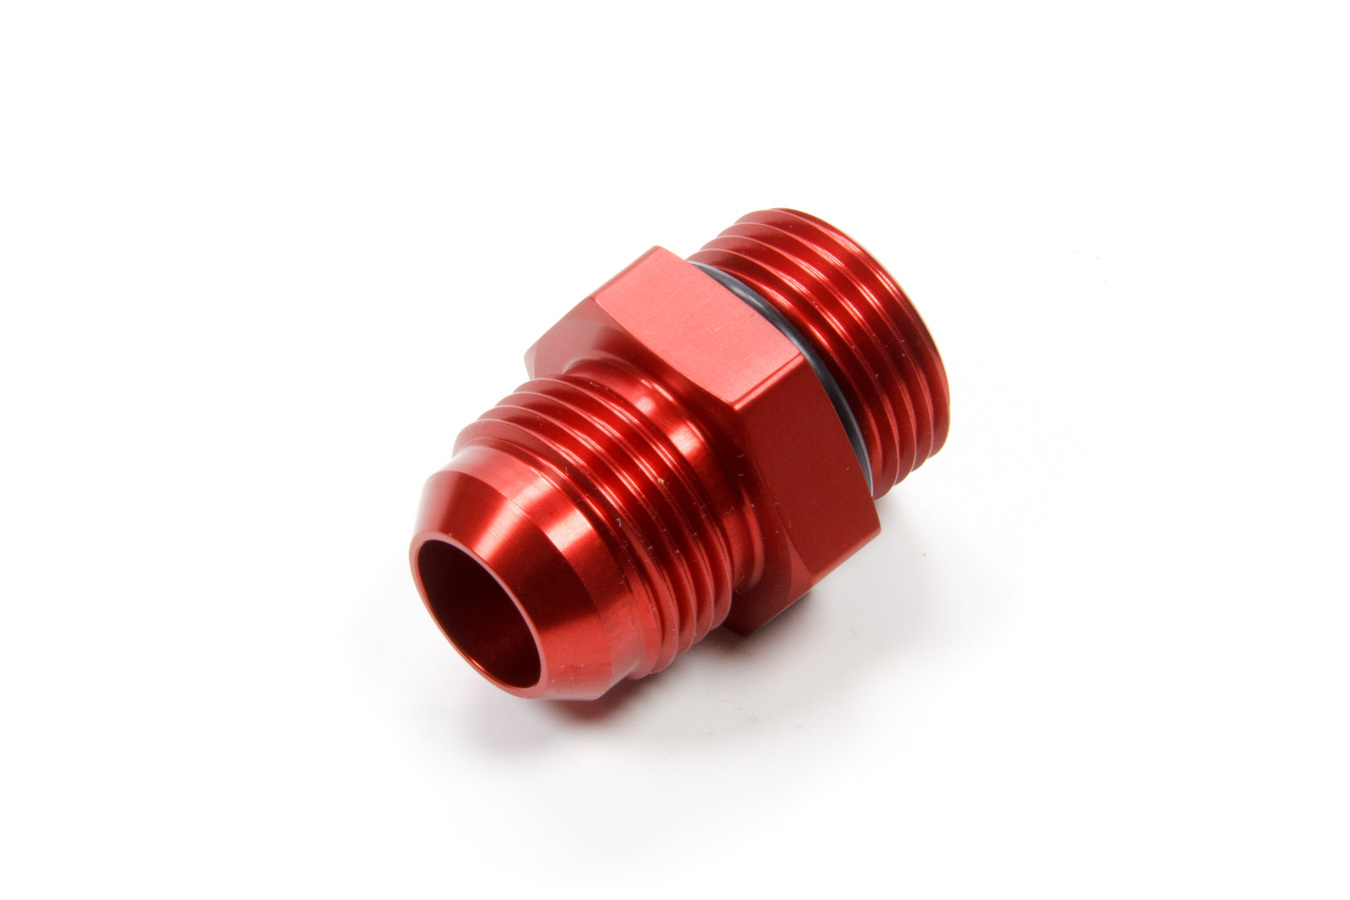 Stock Car Products 1212-12 Fitting, Adapter, Straight, 12 AN Male to 12 An Male, Aluminum, Red Anodized, Each